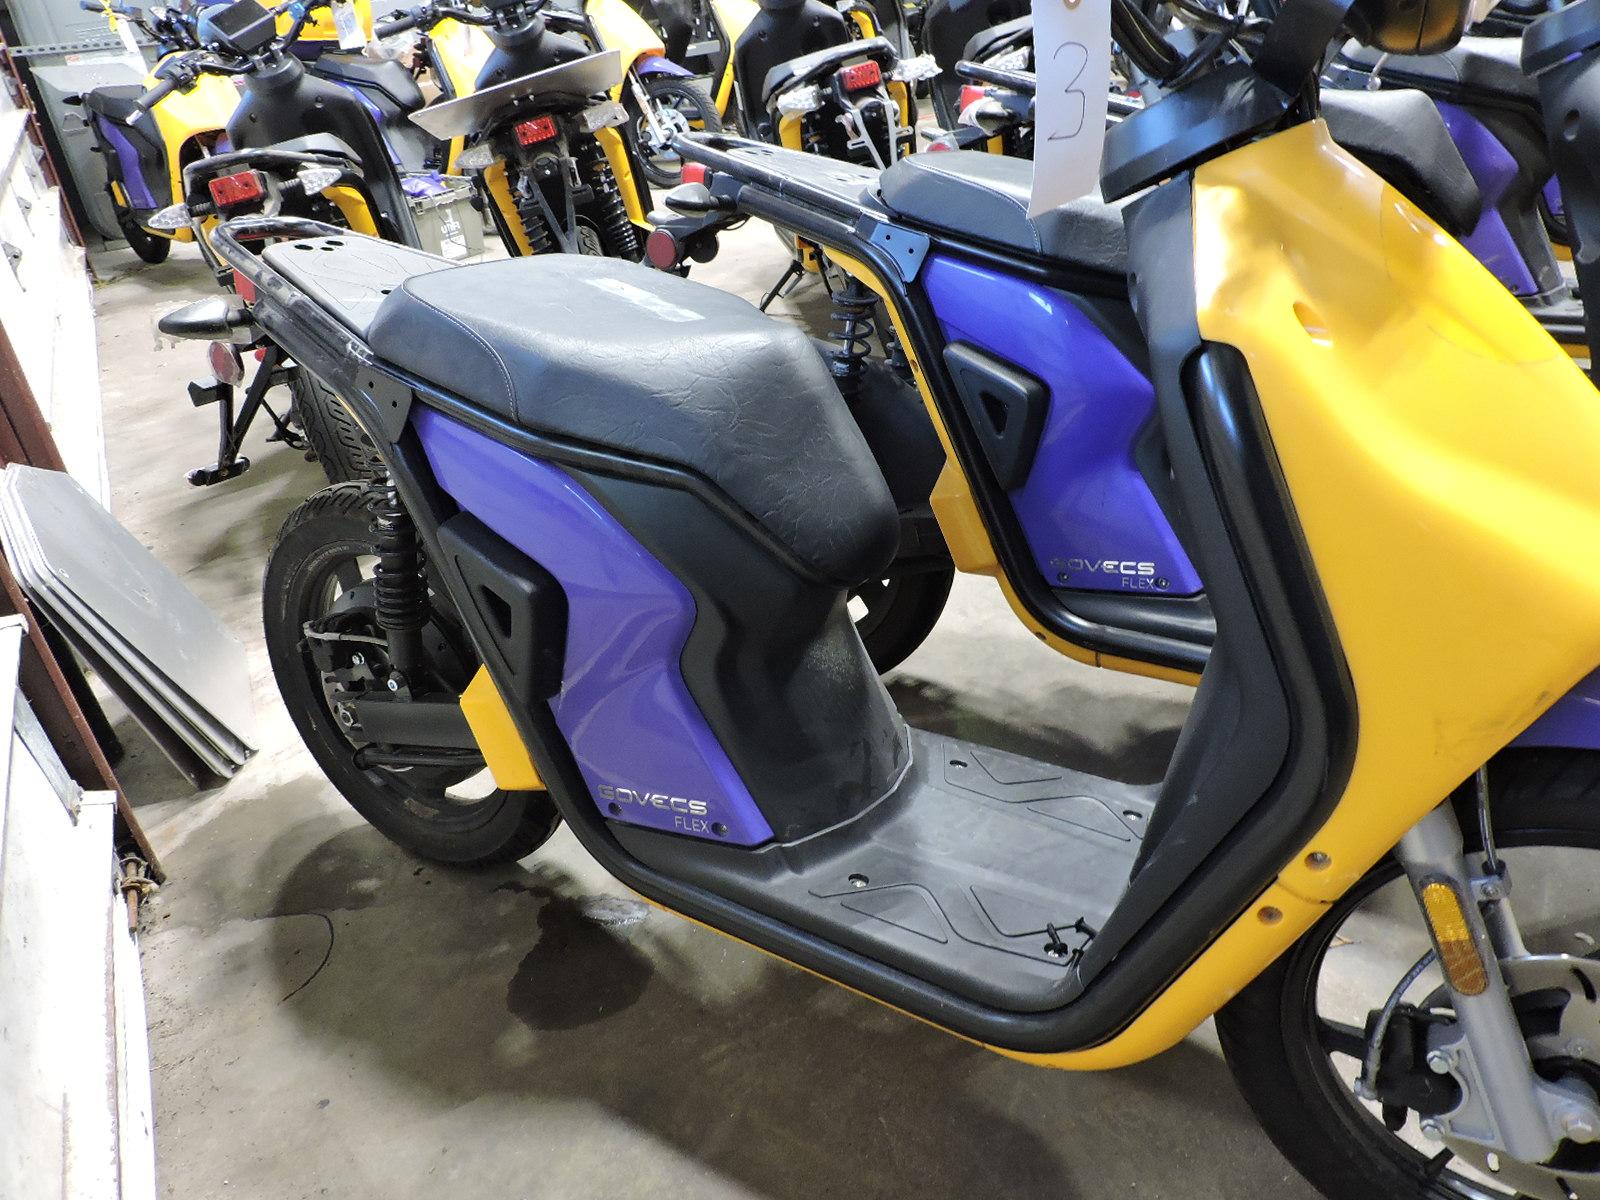 GOVECS FLEX 2.0 - Electric Scooter - Moped / 1.3 Miles / 2 Keys, Battery & Charger - Runs Well